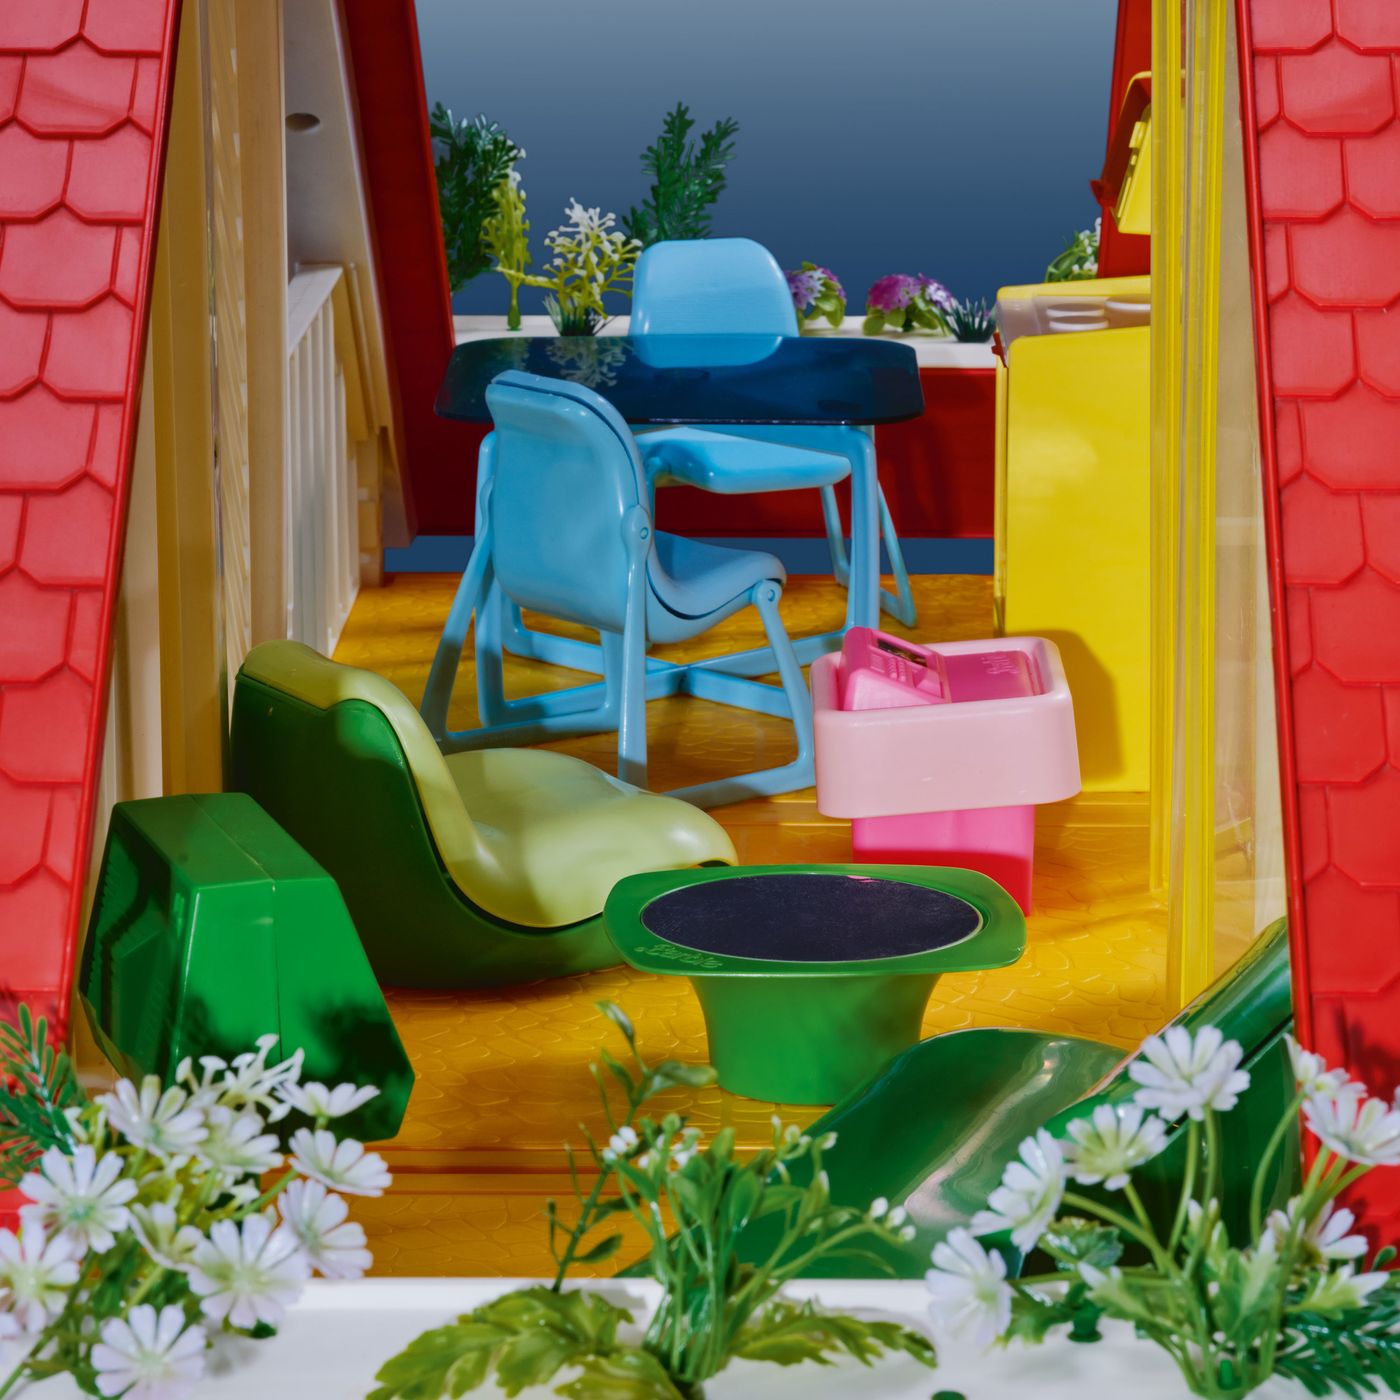 Excerpt From 'Barbie Dreamhouse: An Architectural Survey'